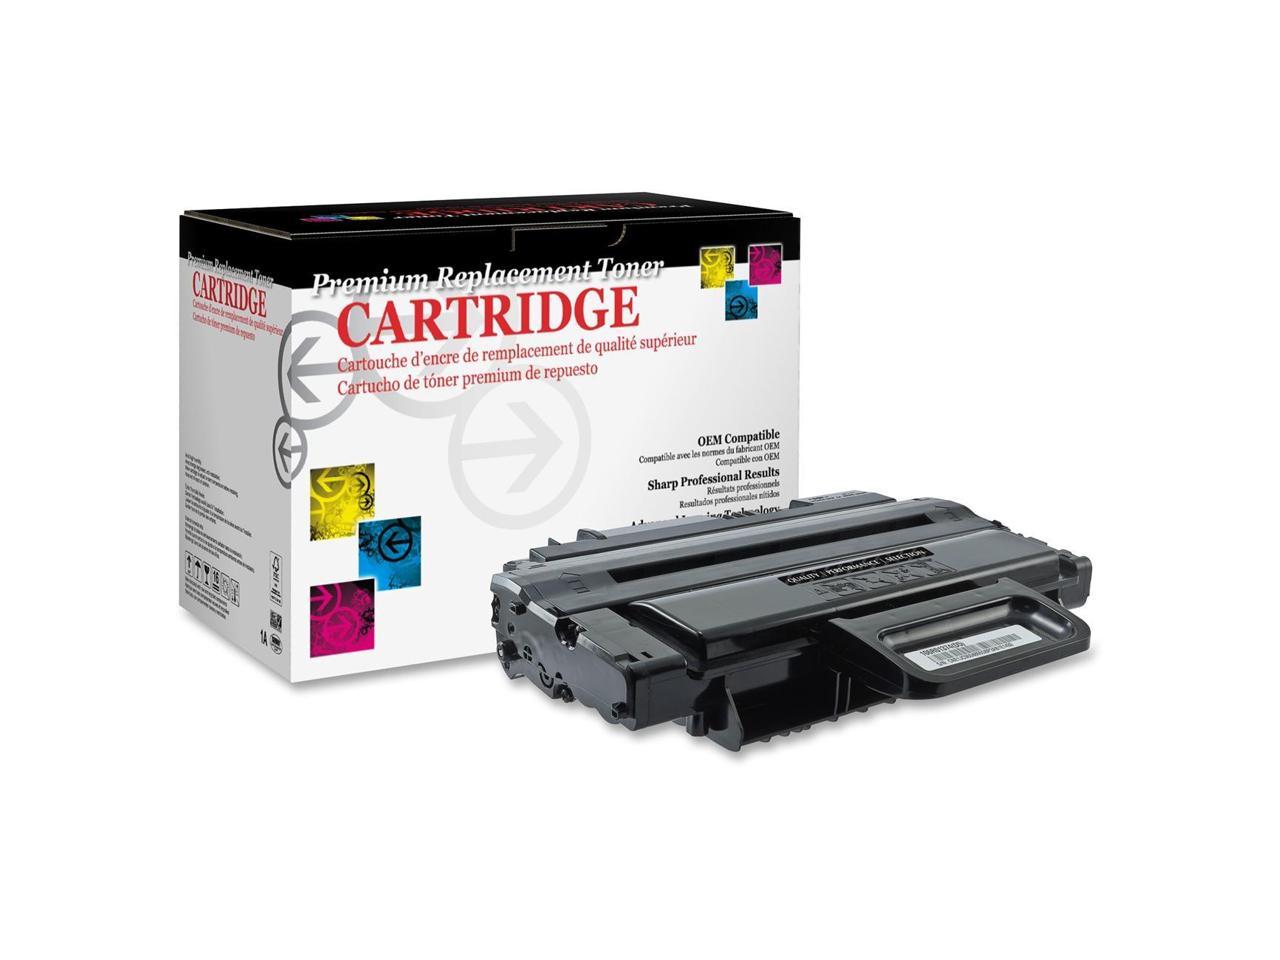 Remanufactured WEST POINT PRODUCTS 116391P Toner Cartridge 5 000 Page Yield Black - image 2 of 3